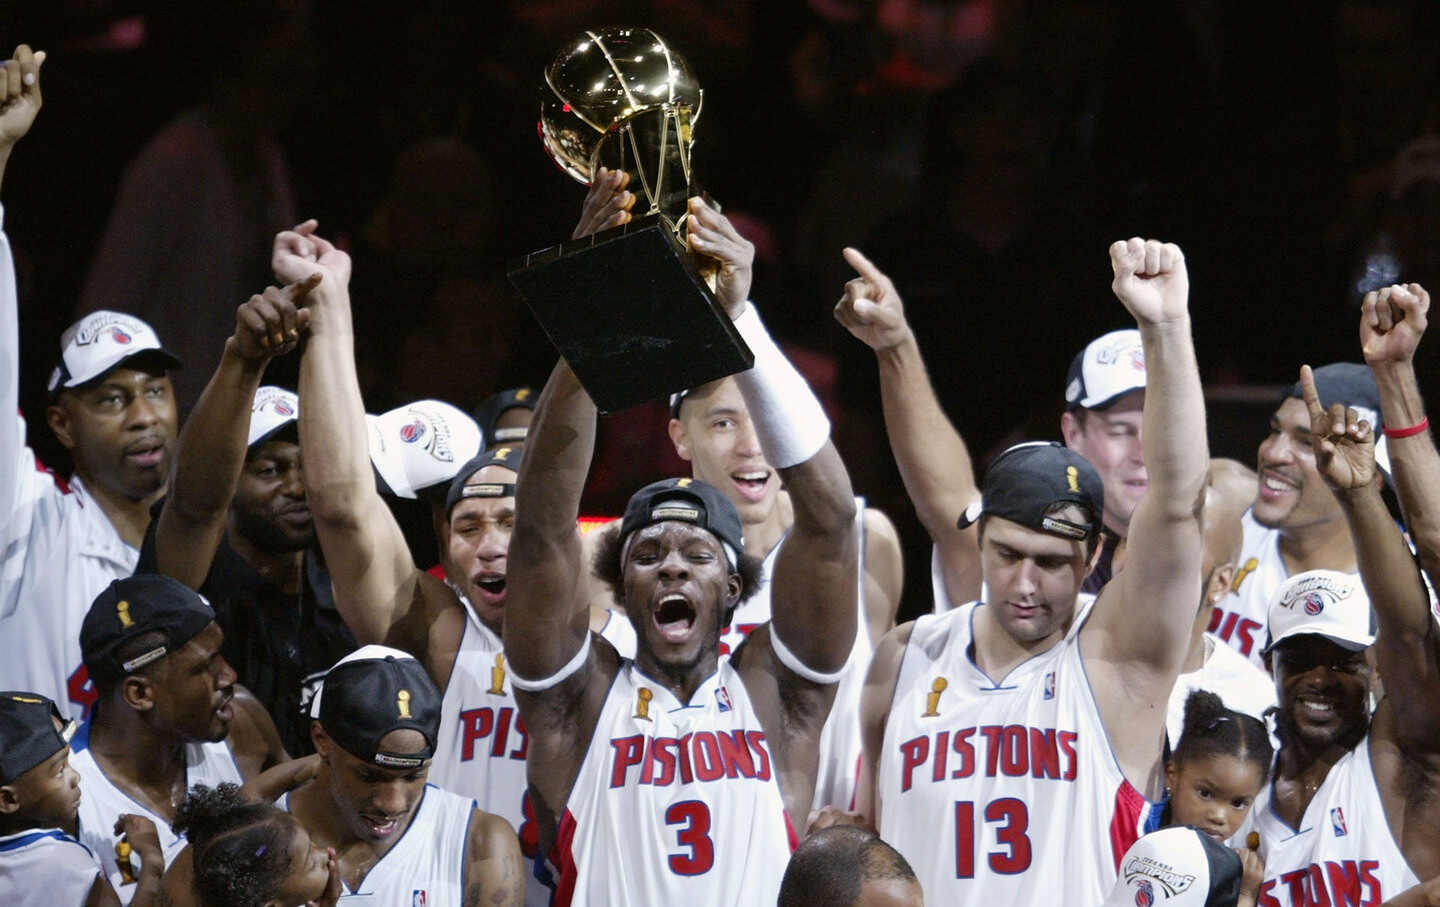 Ben Wallace, #3 of the Detroit Pistons, holds up the Larry O'Brien NBA Championship trophy as he celebrates with teammates after defeating the Los Angeles Lakers 100-87 in game five of the 2004 NBA Finals on June 15, 2004.